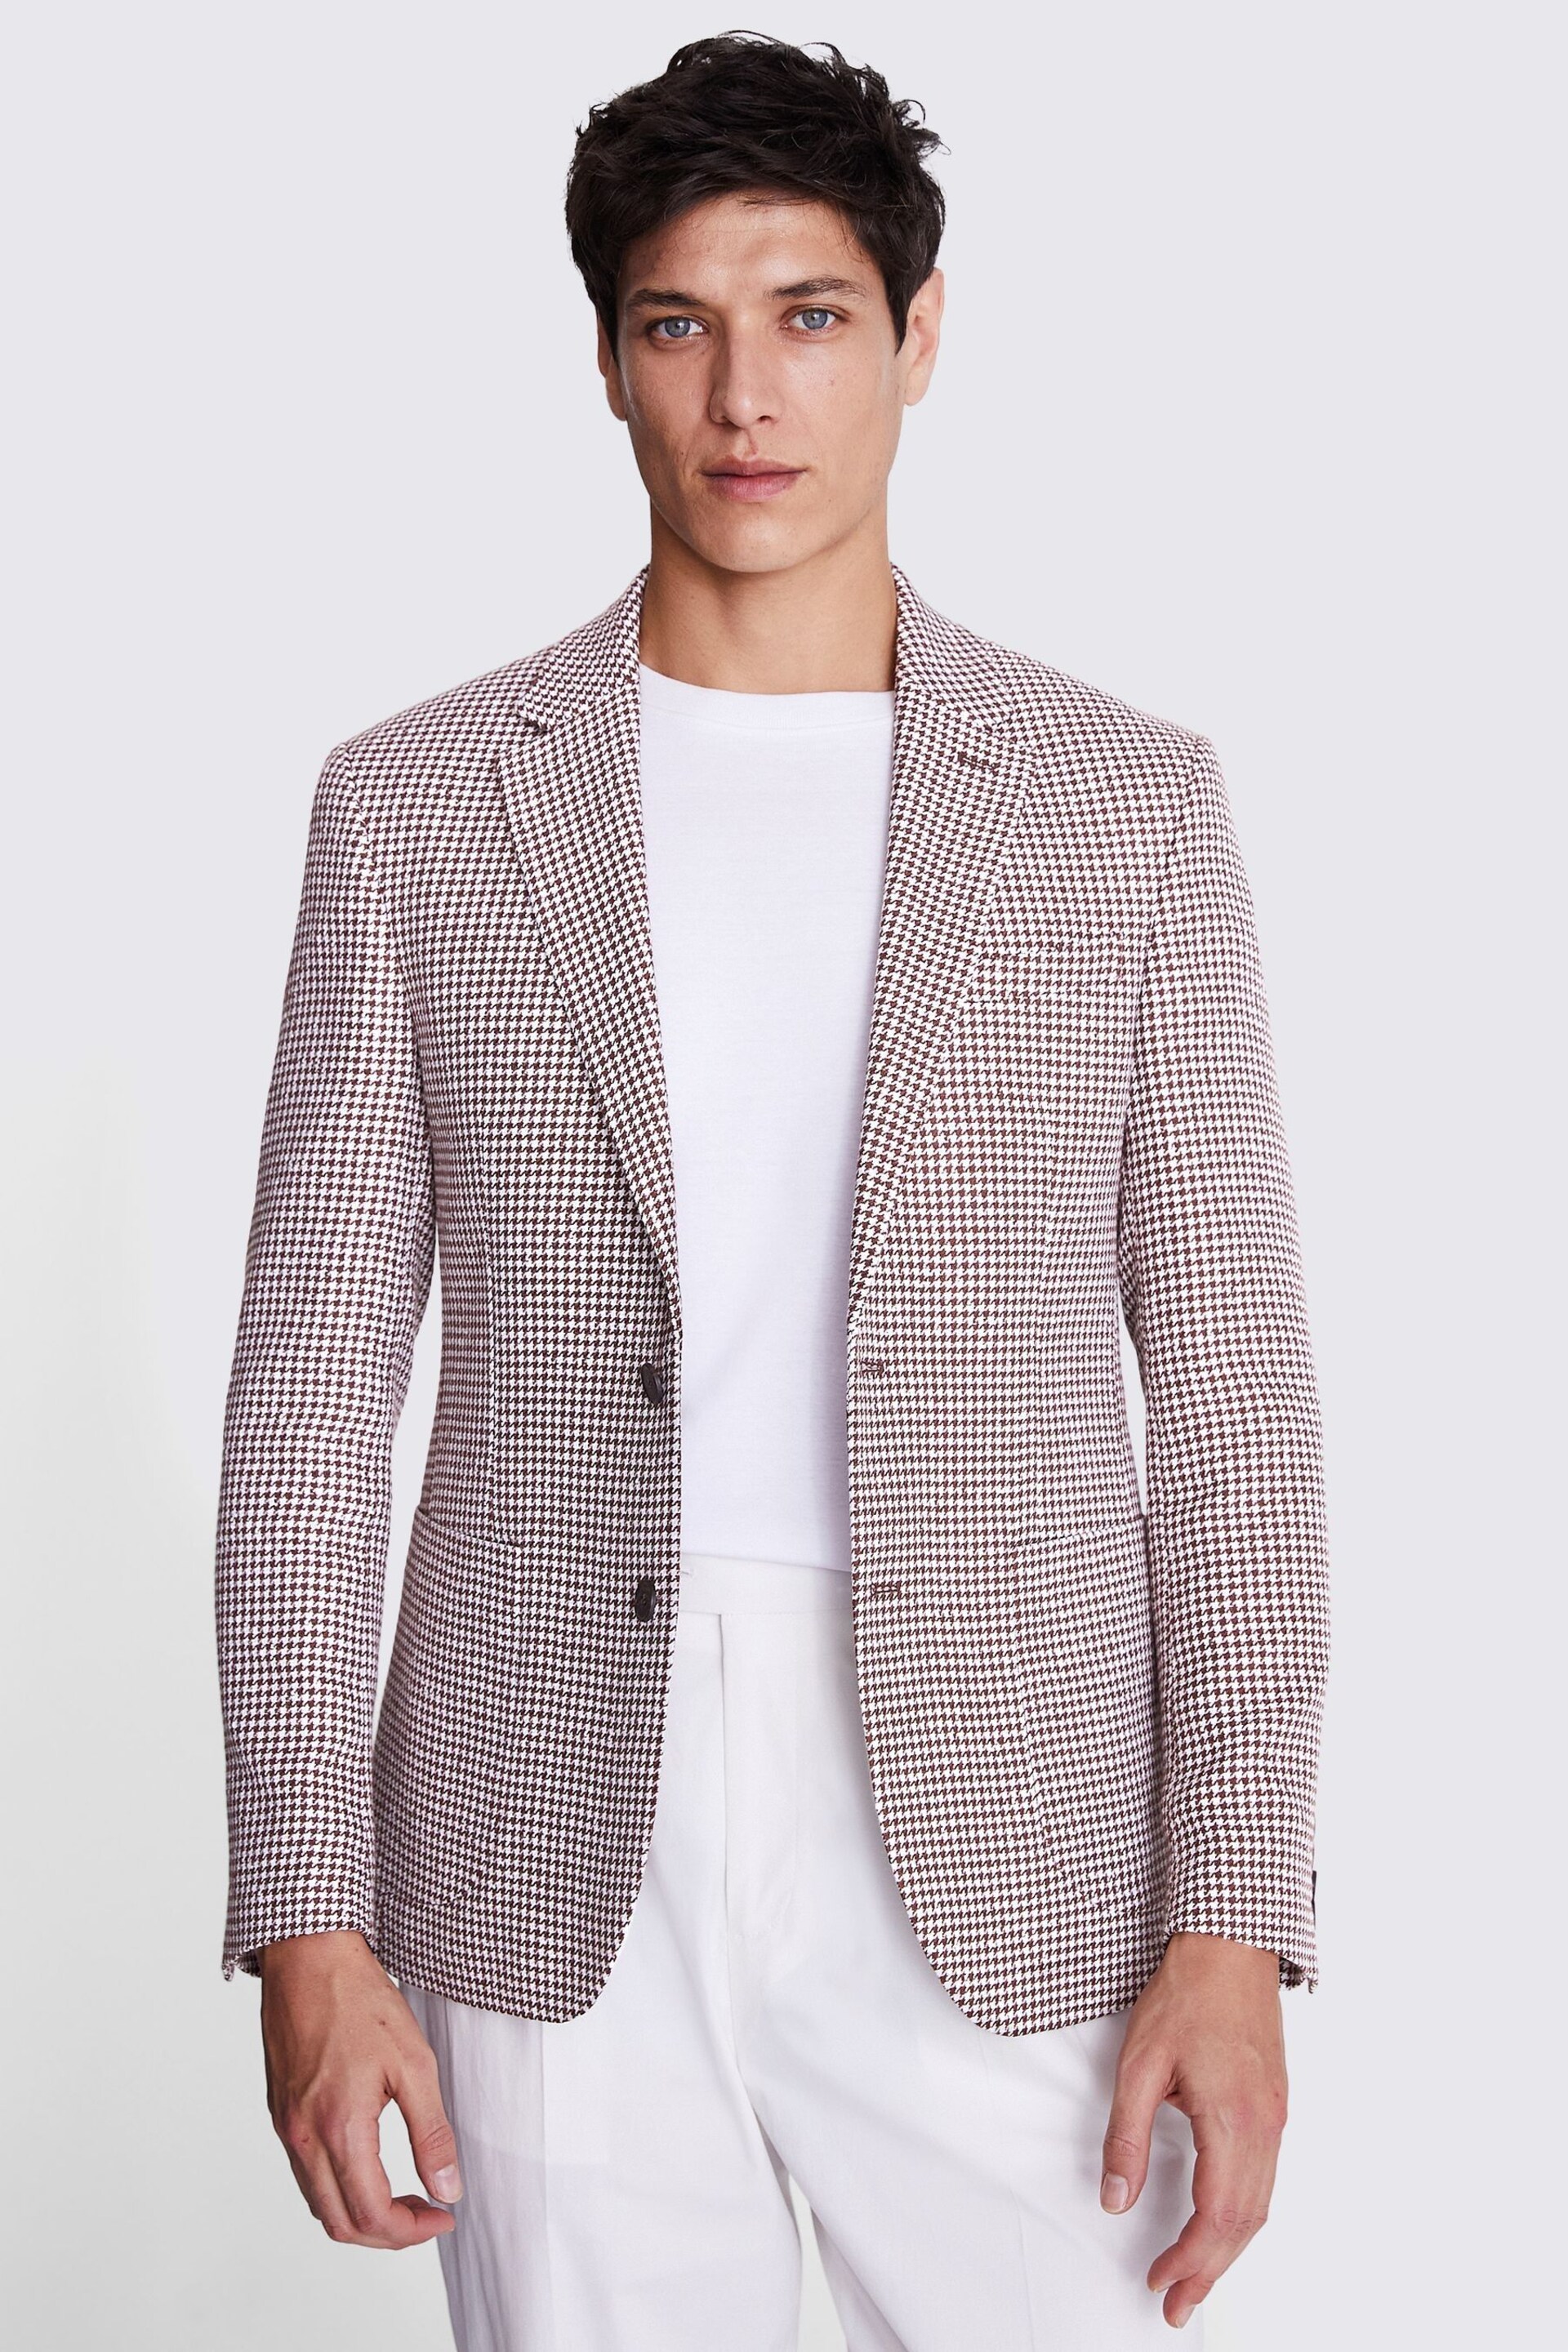 MOSS Tailored Fit Houndstooth Jacket - Image 4 of 6